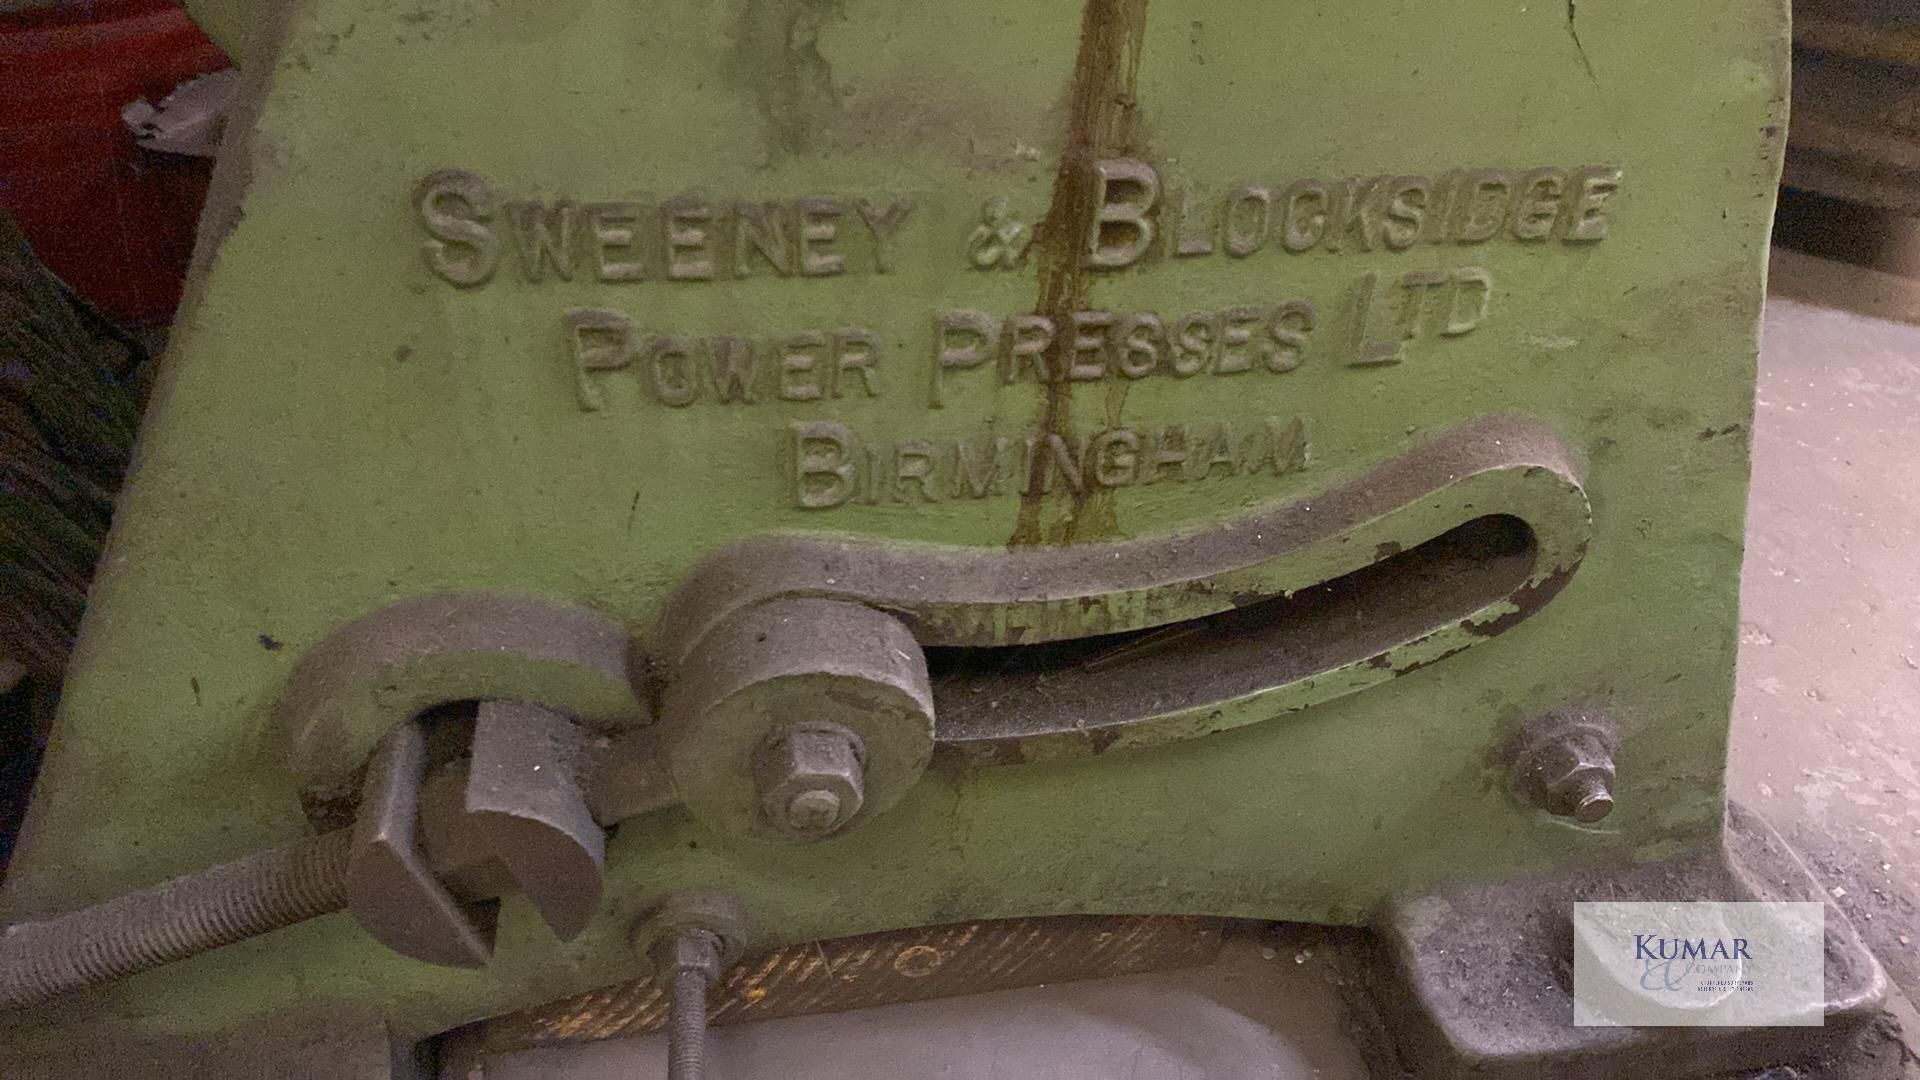 Sweeney & BlockSide No. 9 Inclinable C Frame Press. Approx 30 Tonne (Please note- Buyer is - Image 4 of 6